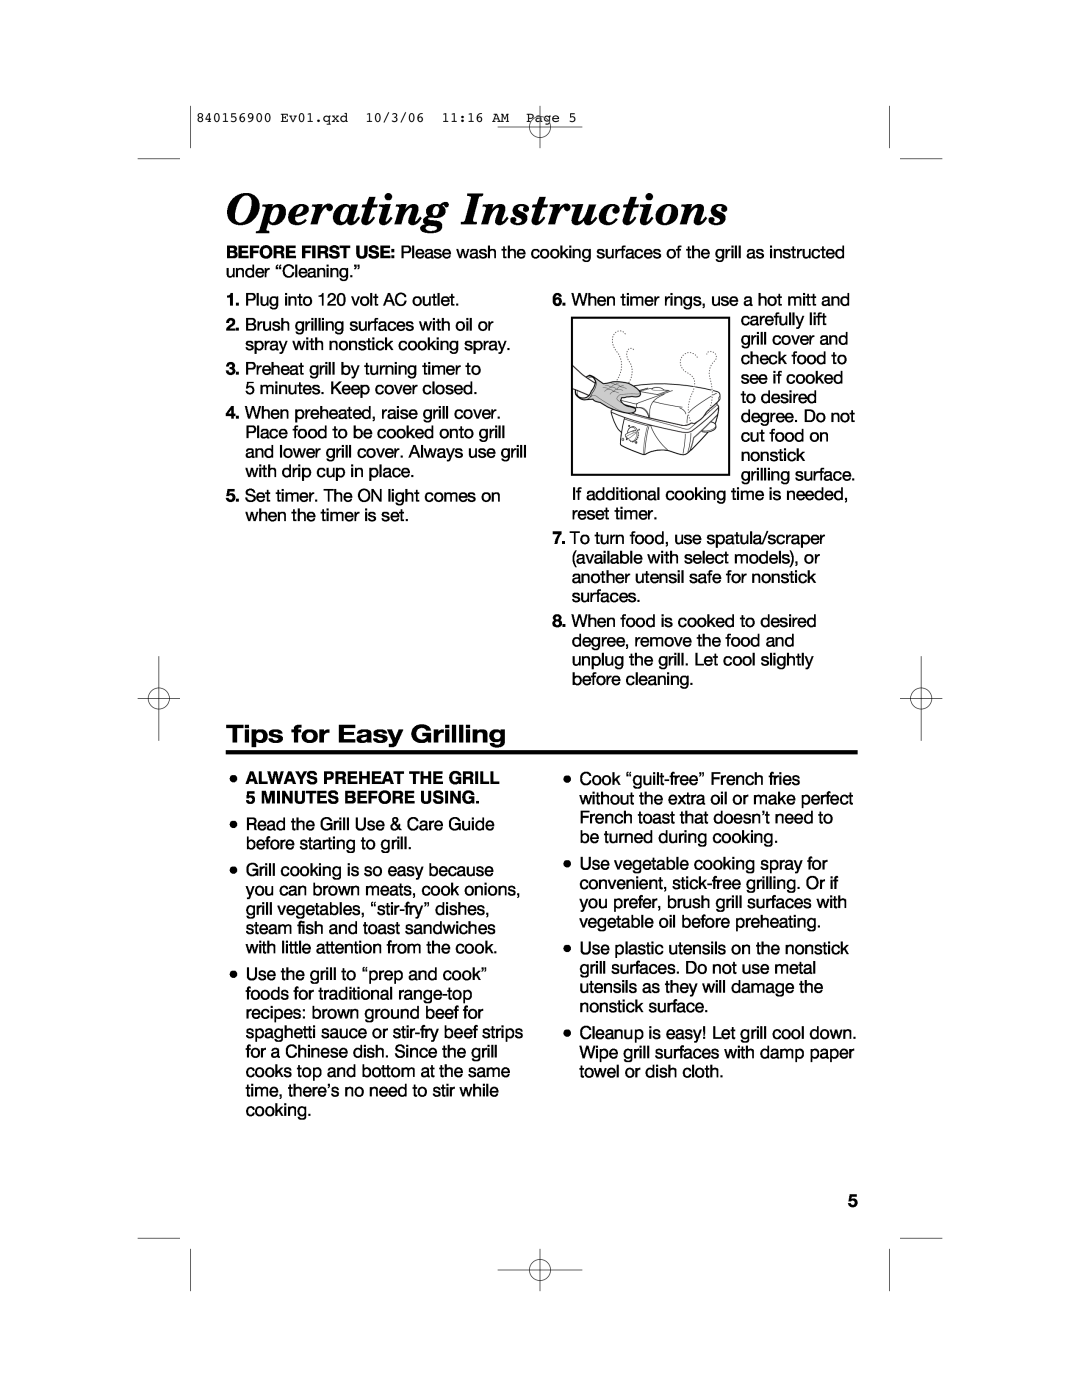 Hamilton Beach 25285 manual Operating Instructions, Tips for Easy Grilling, ALWAYS PREHEAT THE GRILL 5 MINUTES BEFORE USING 